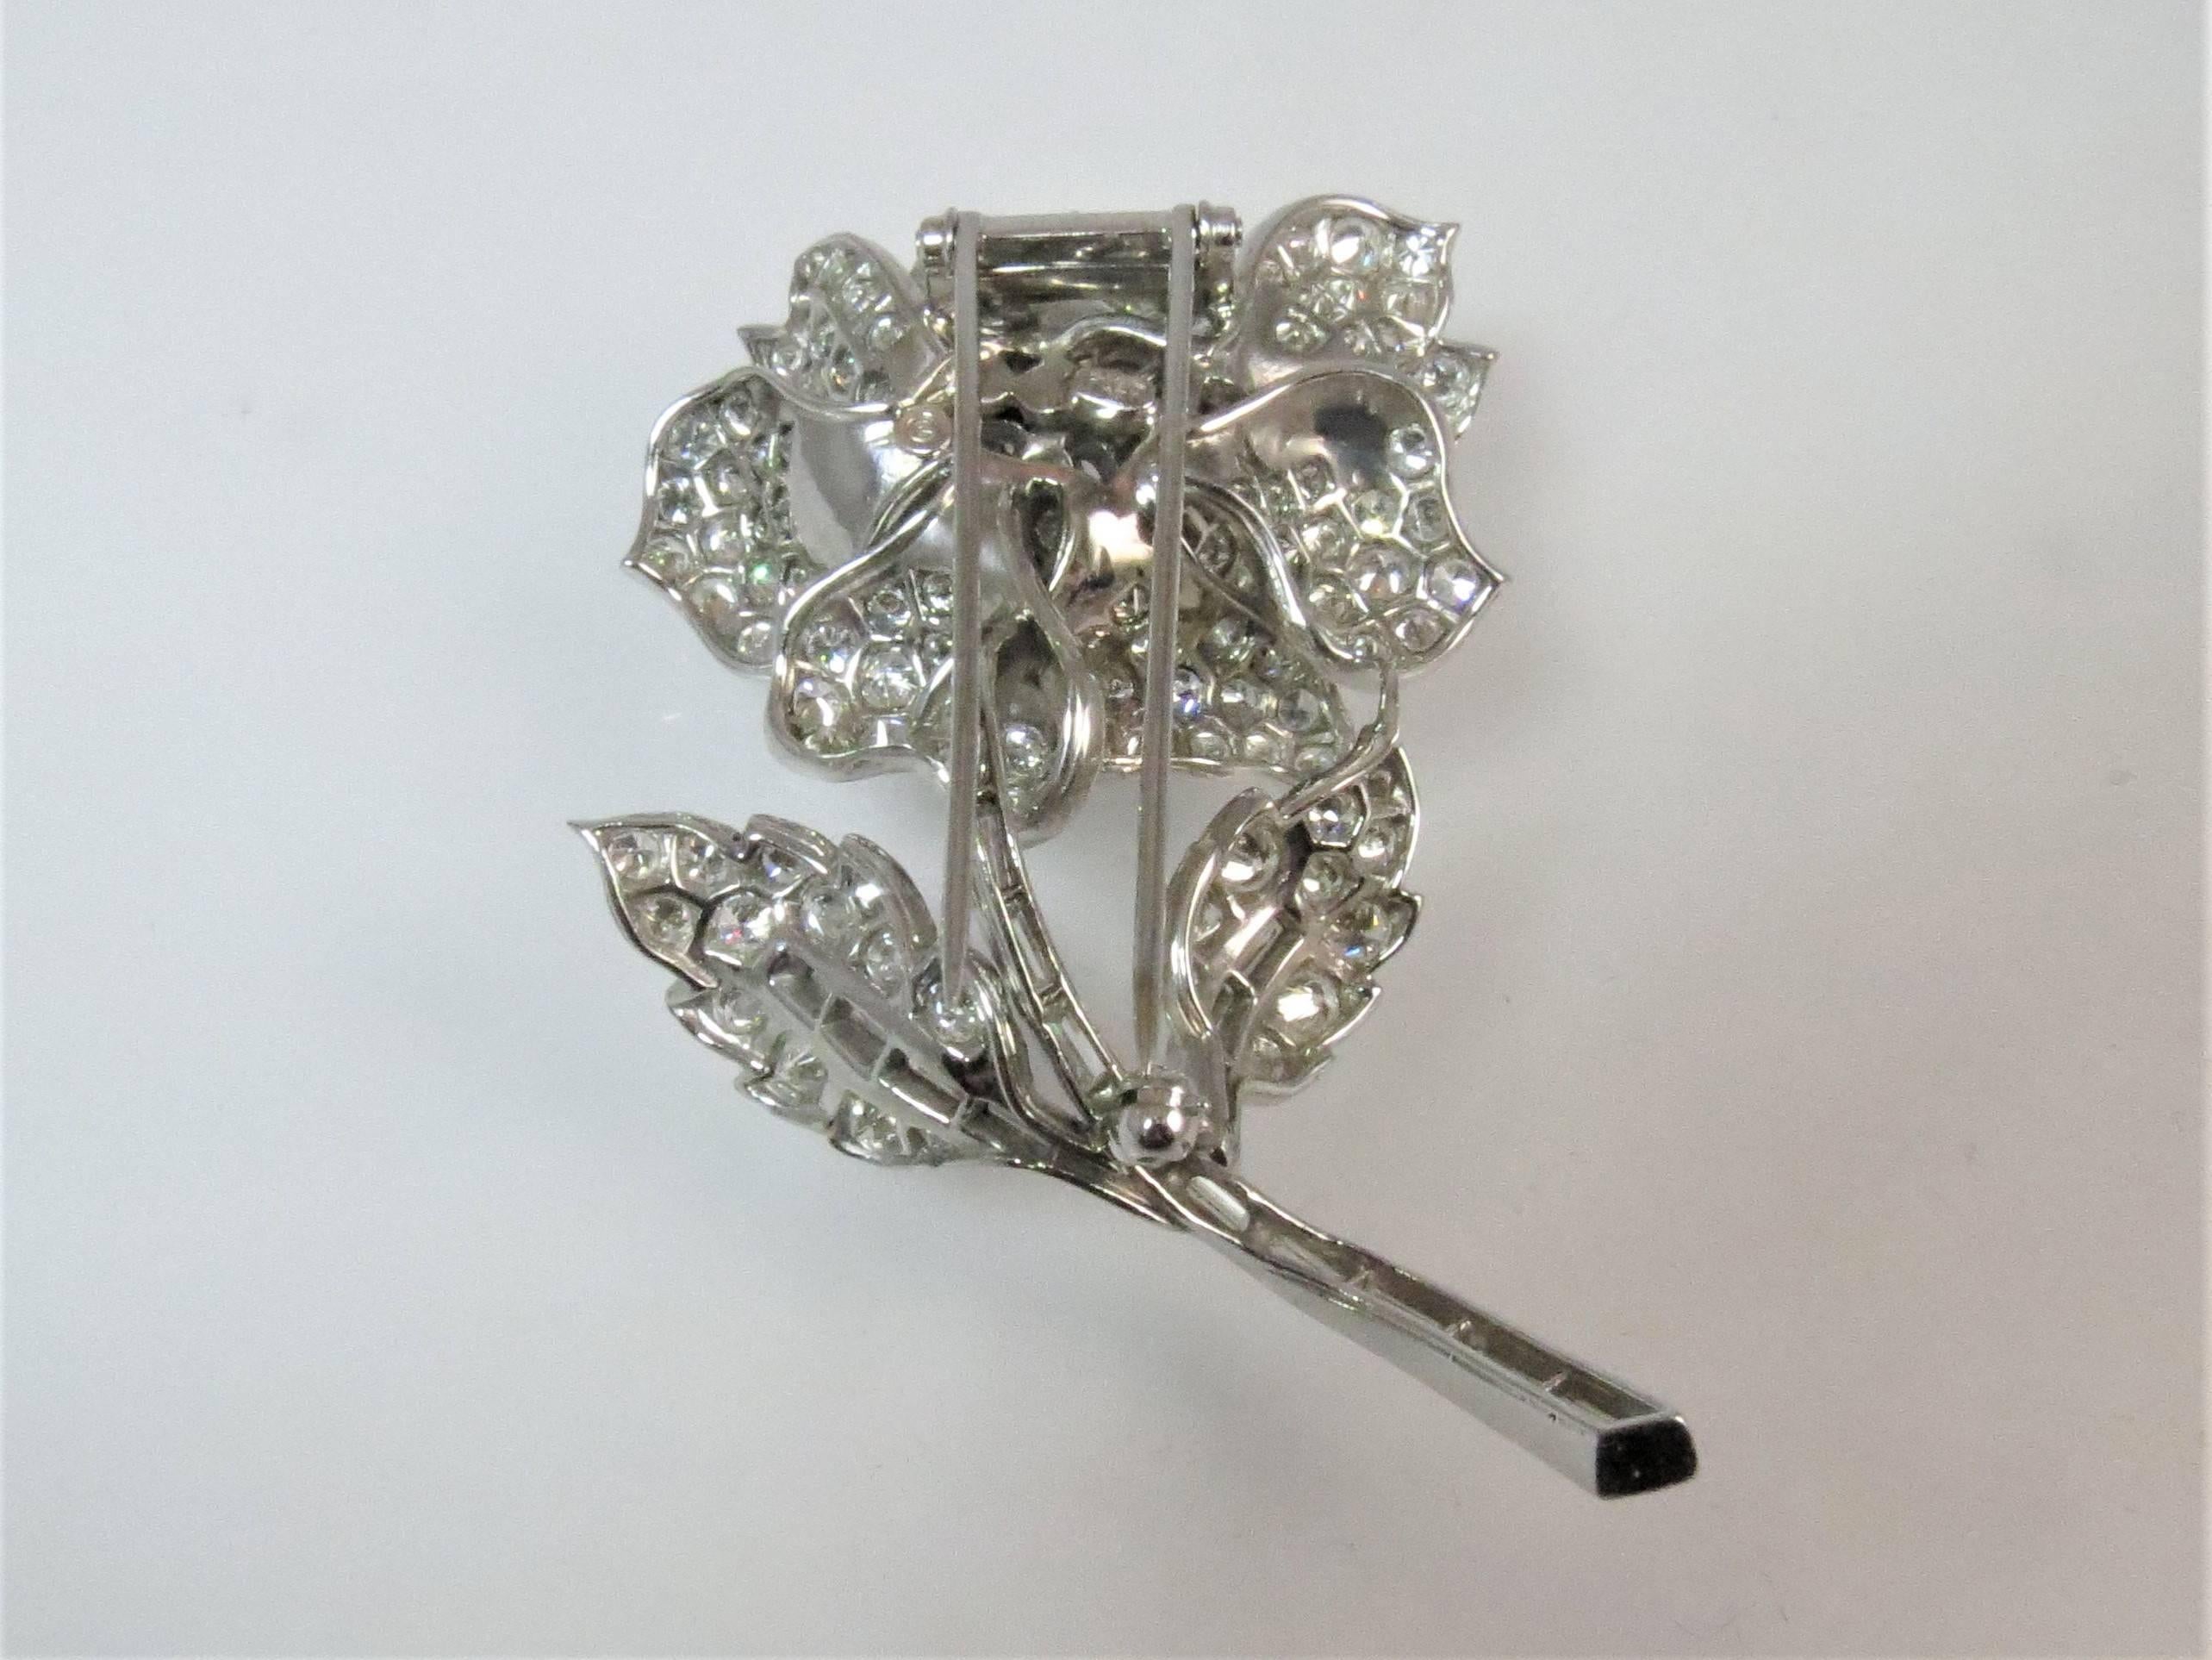 Platinum flower pin with double hinged back, set with 173 full cut round diamonds and 17 baguette diamonds  weighing 12.50cts total, F-G color, VS-SI1 color